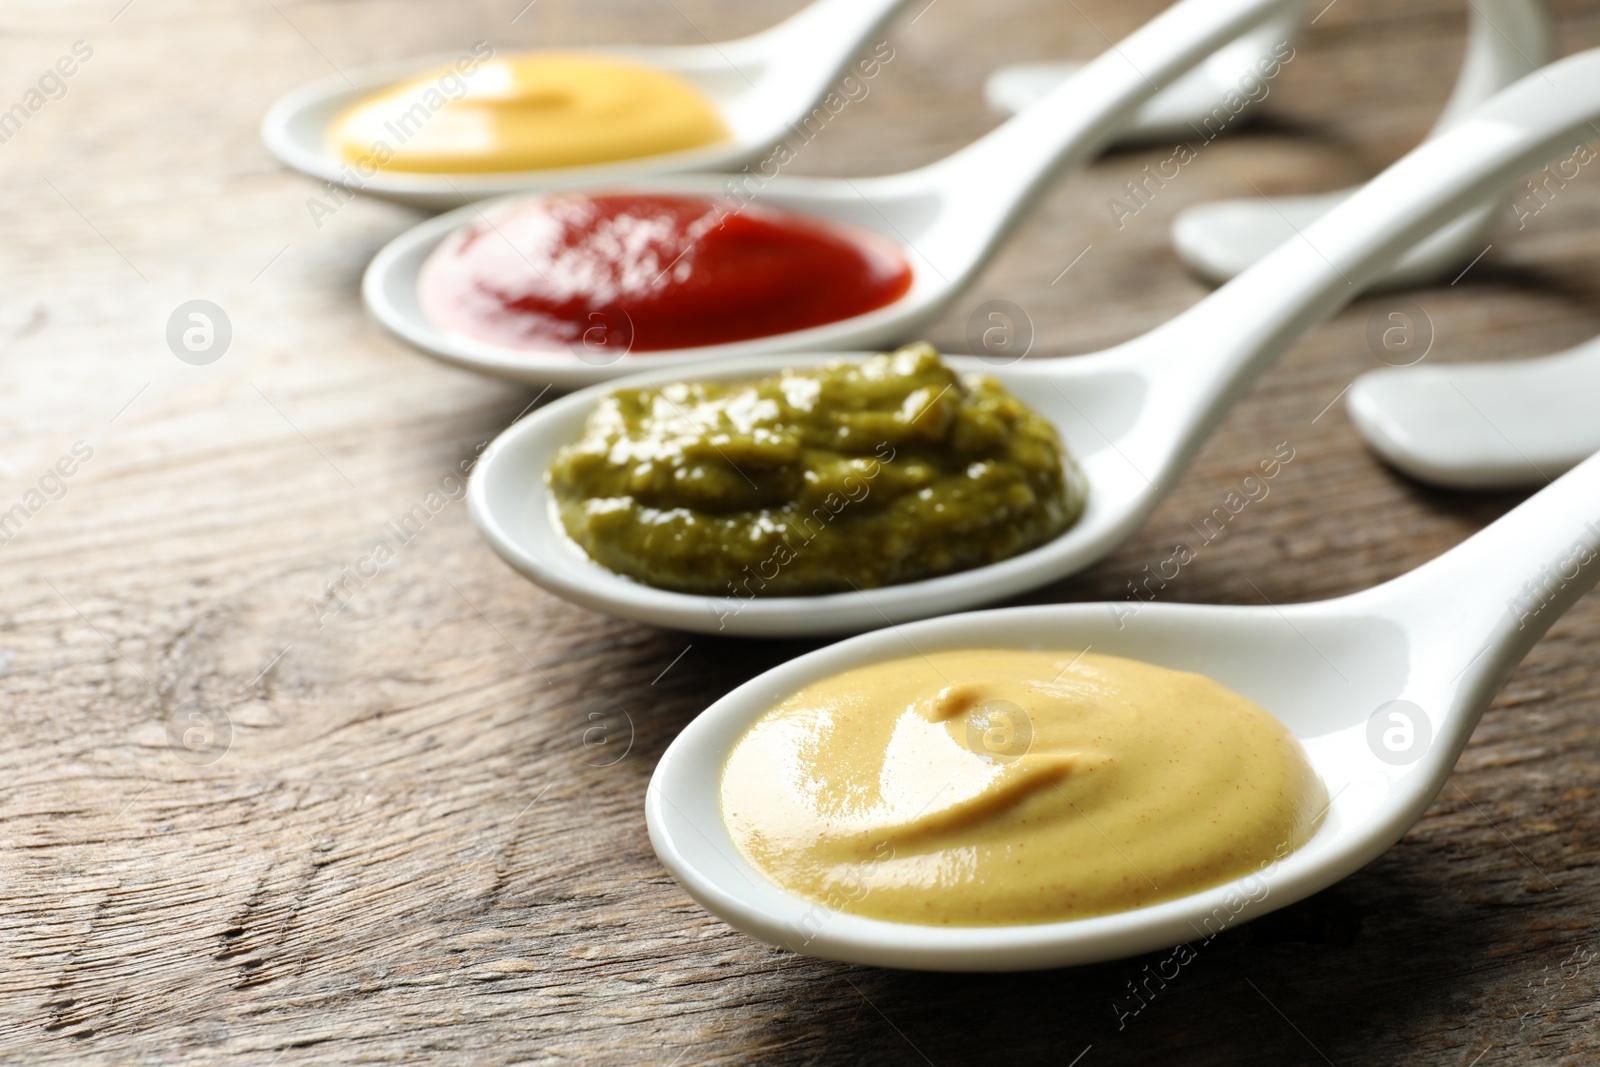 Photo of Spoons with different sauces on wooden background